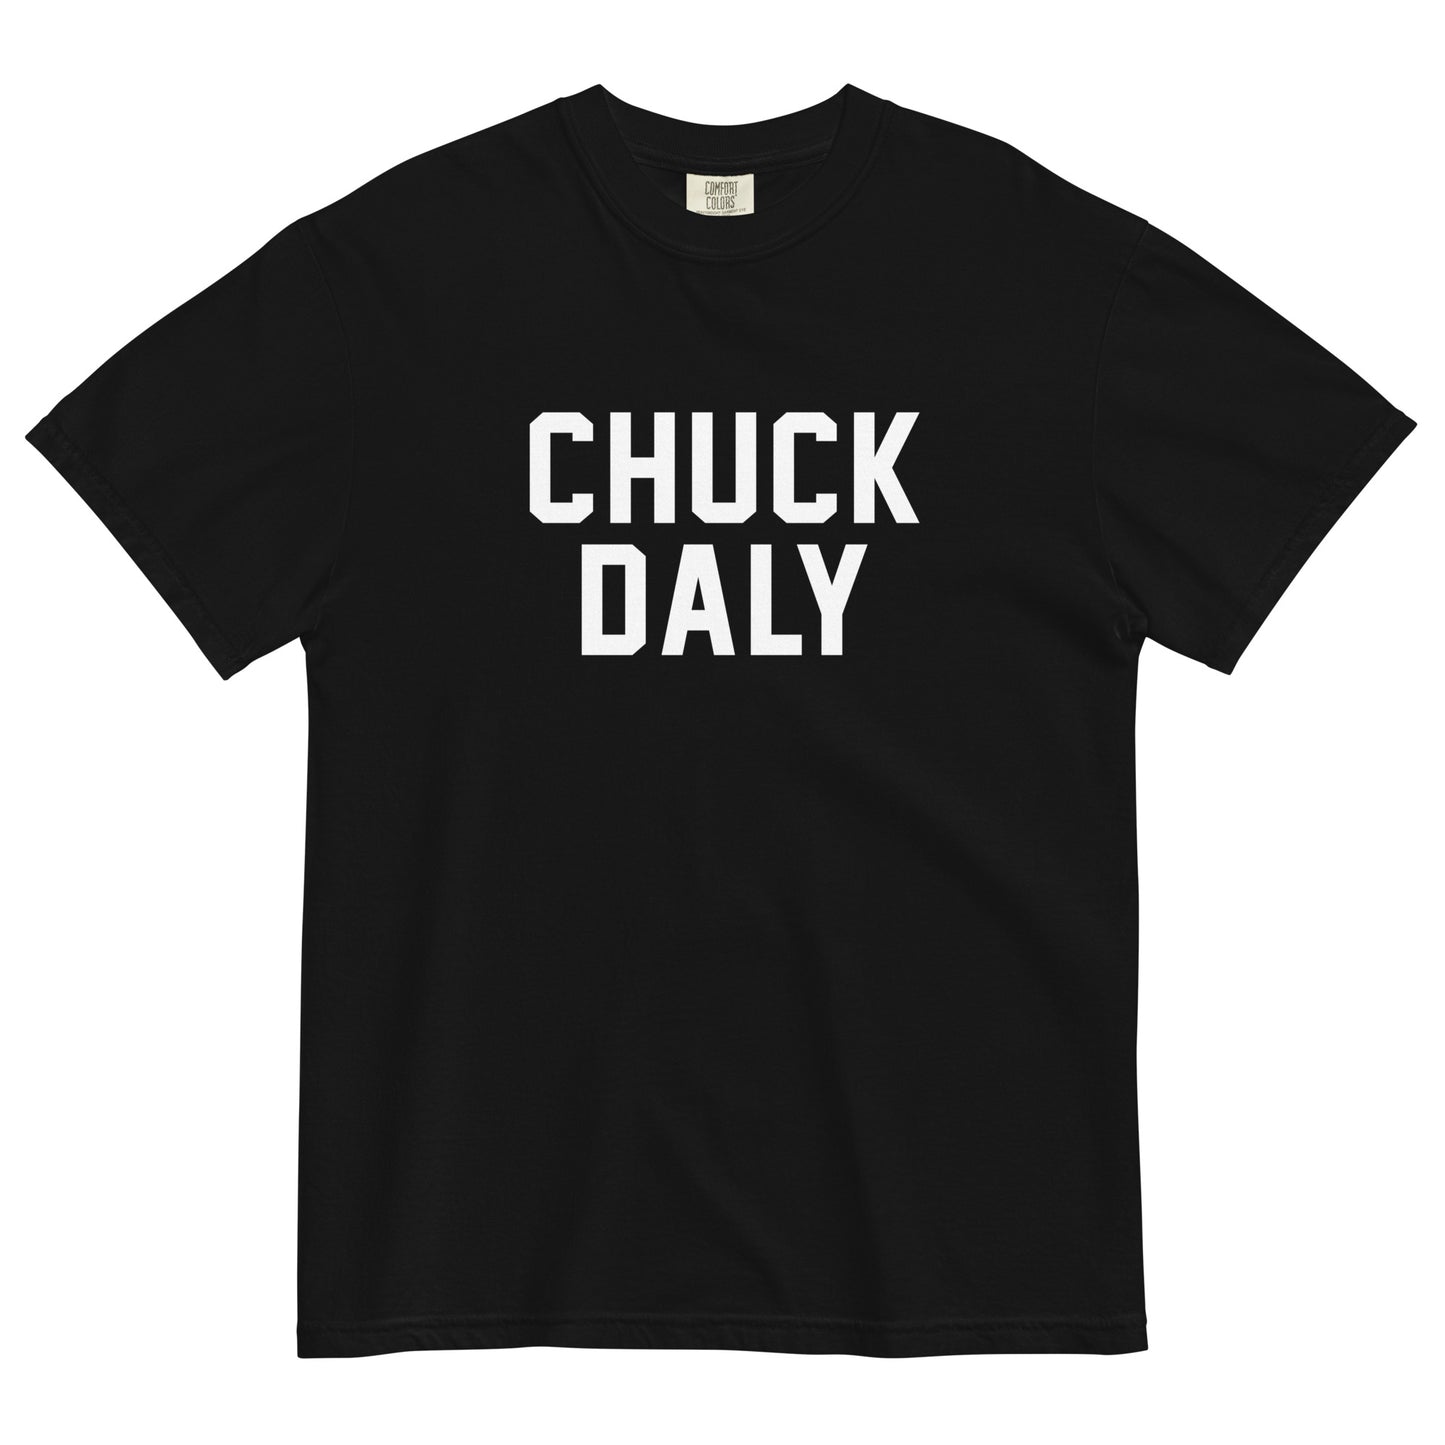 CHUCK DALY